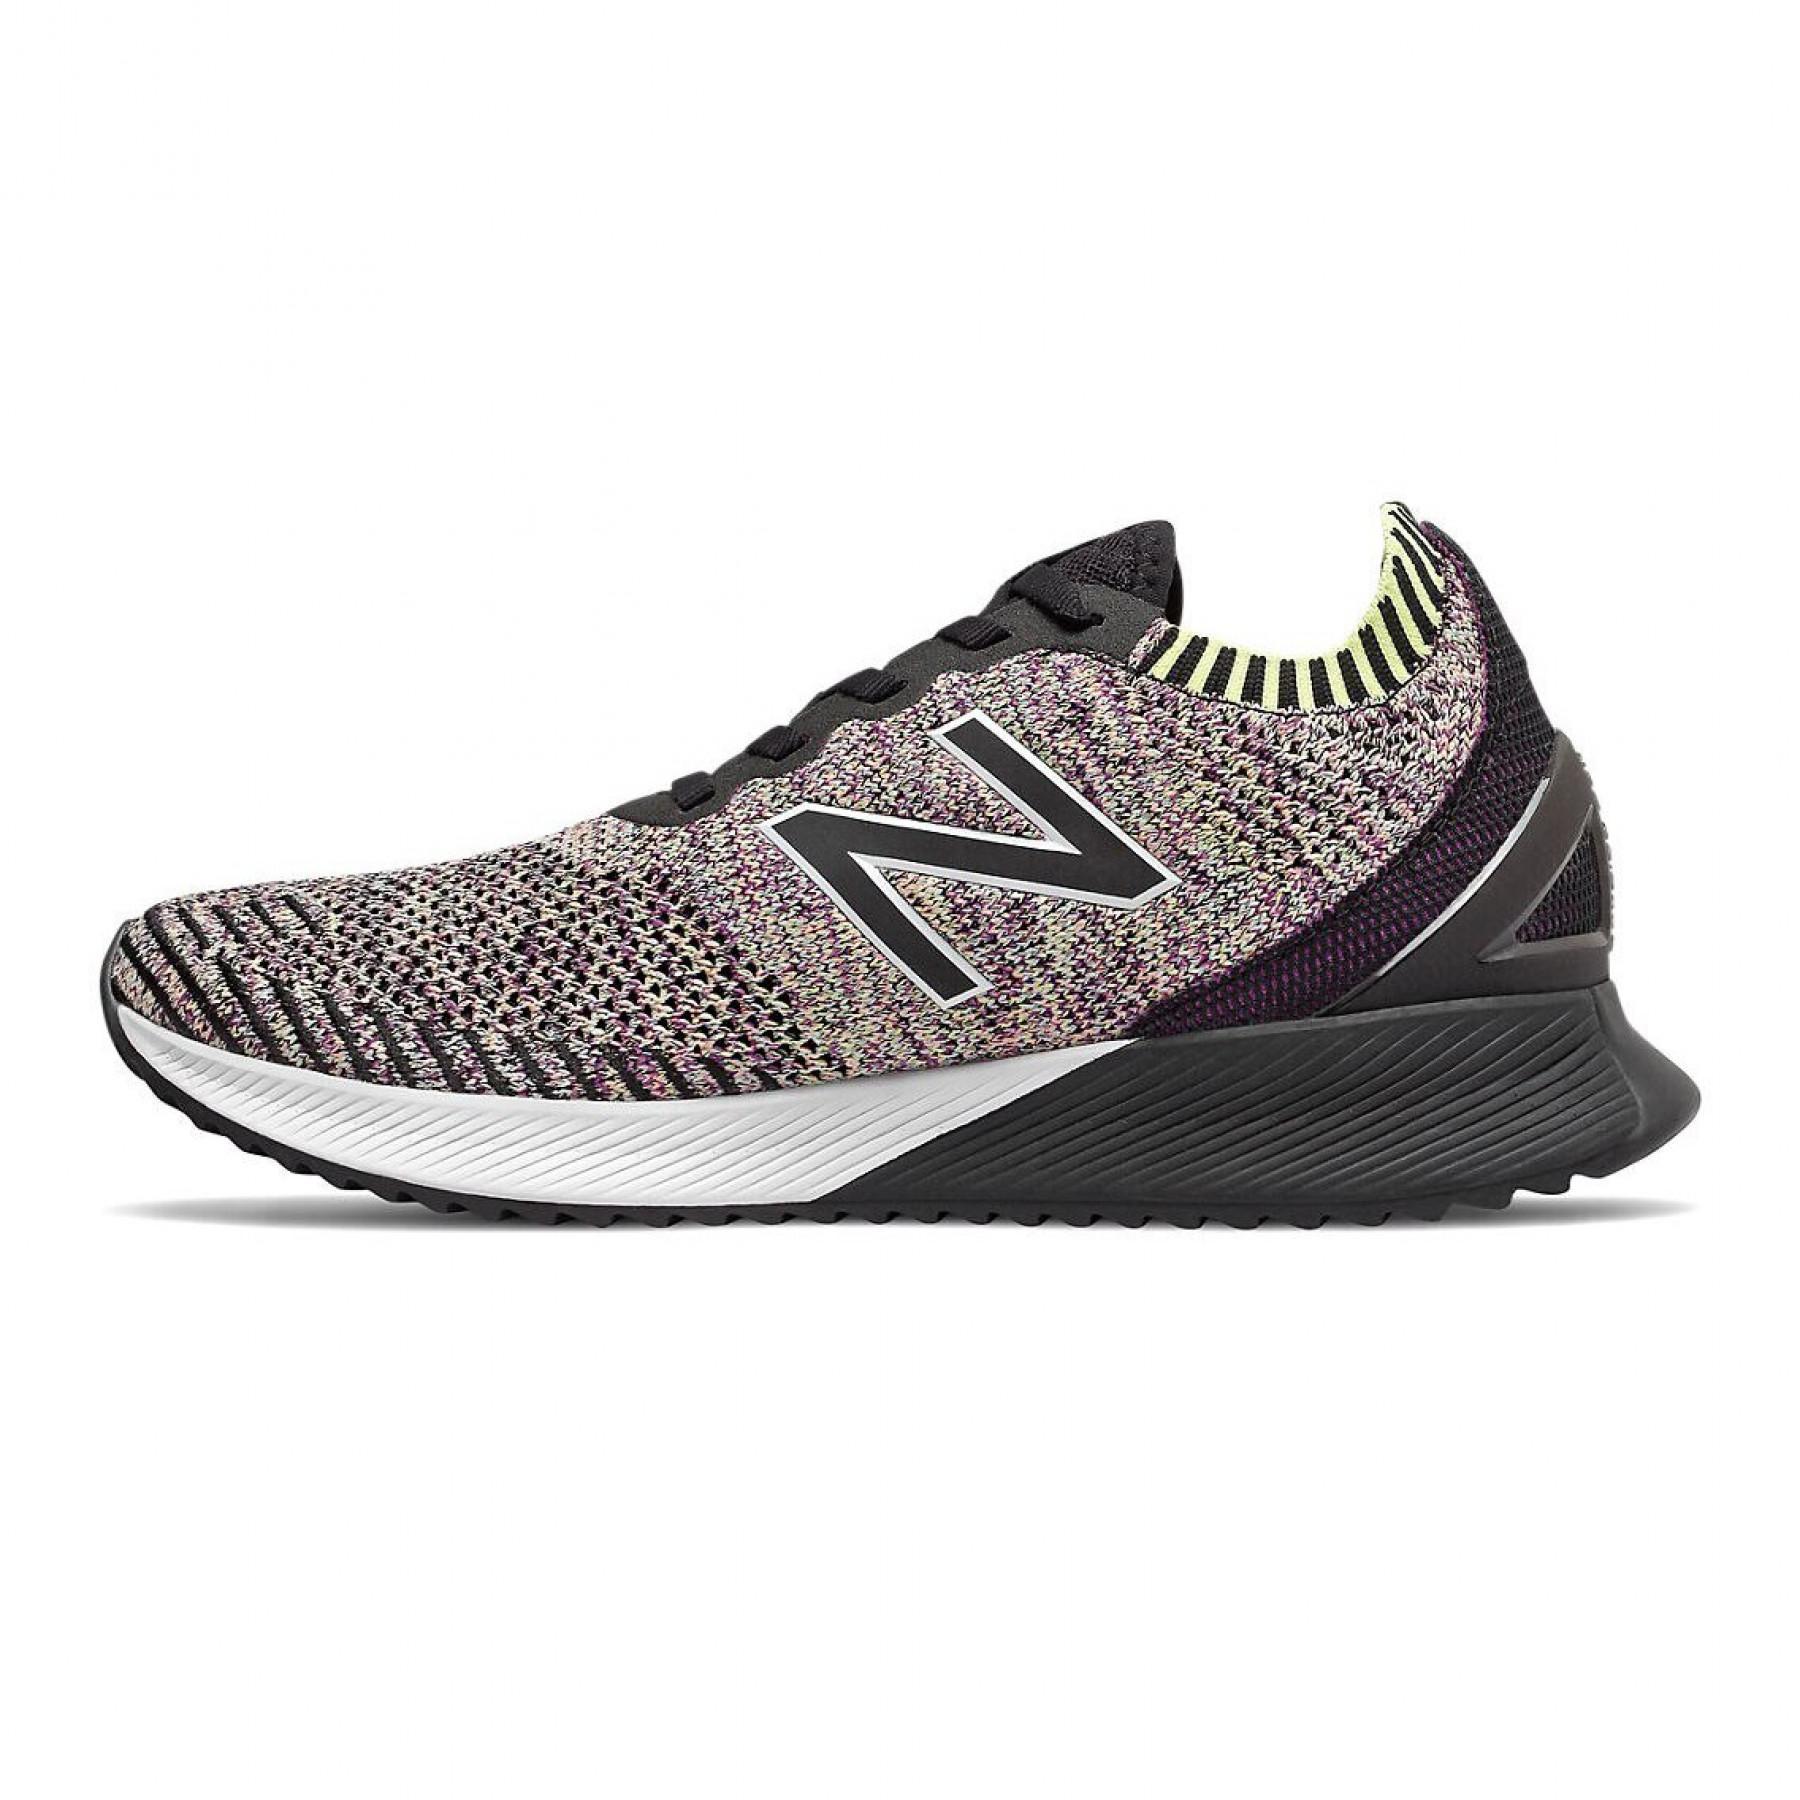 Women's sneakers New Balance FuelCell Echo